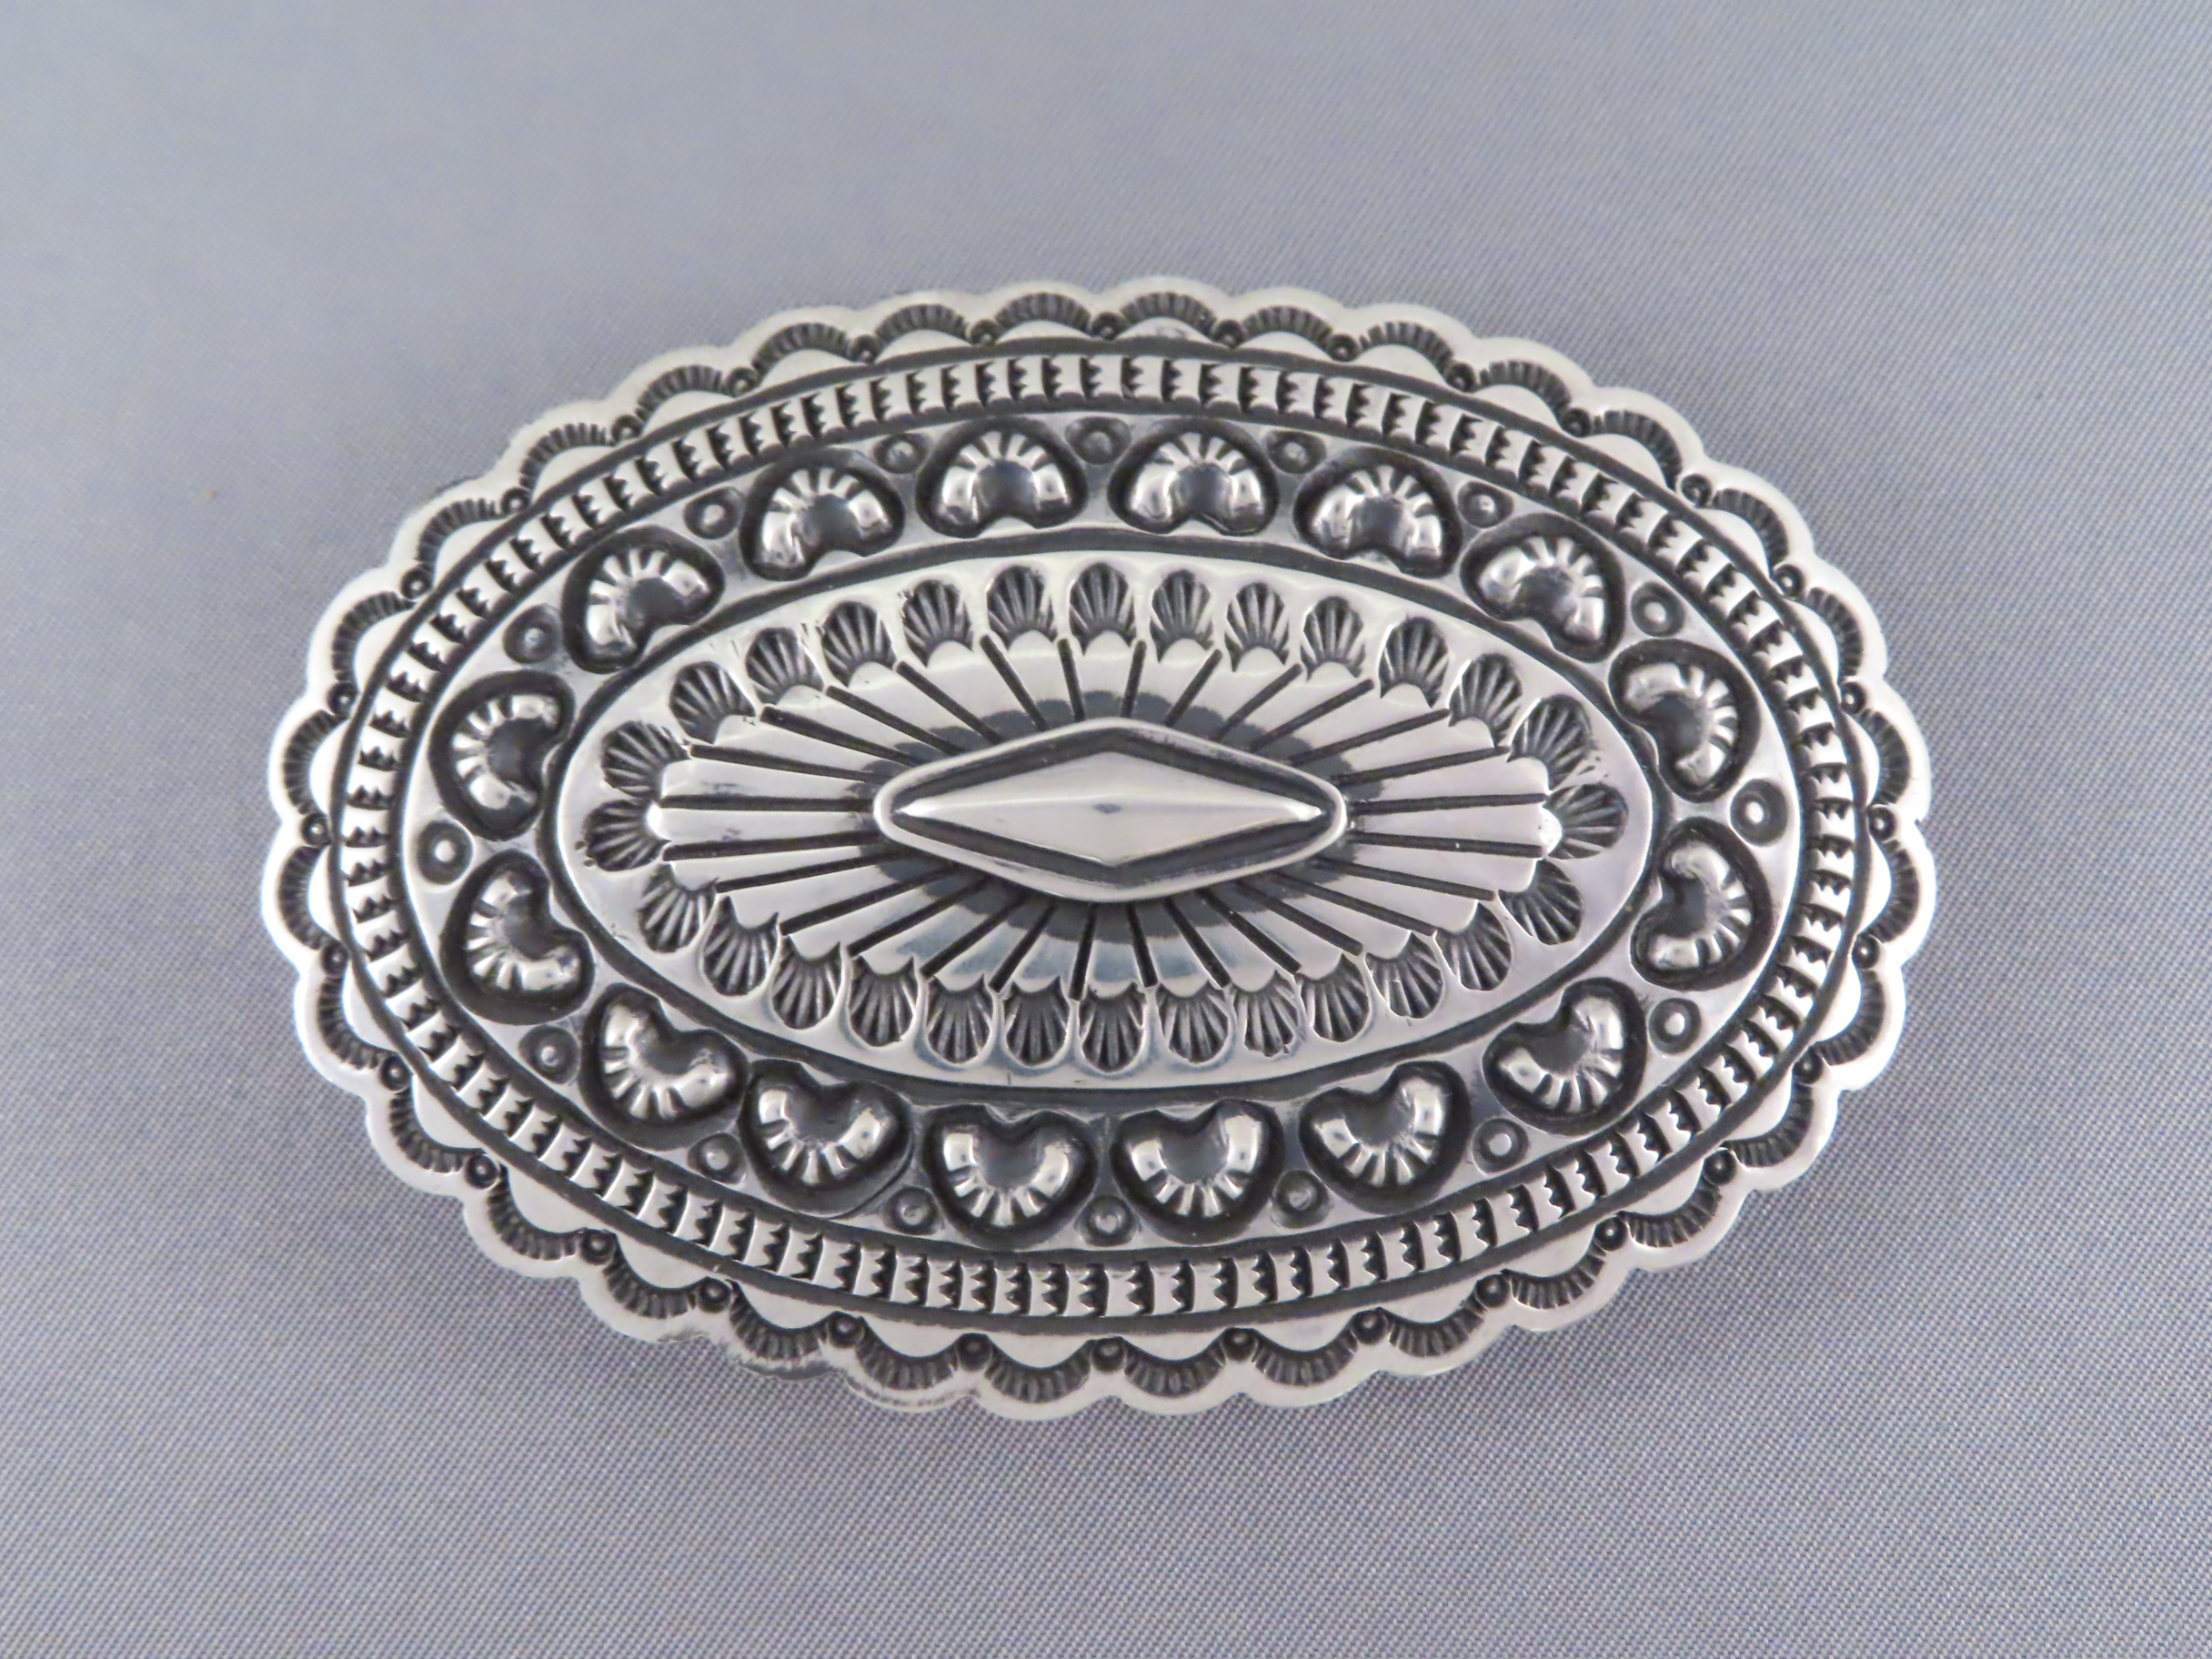 Native American Jewelry - Sterling Silver Belt Buckle by Navajo jeweler, Tsosie Orville White $395- FOR SALE